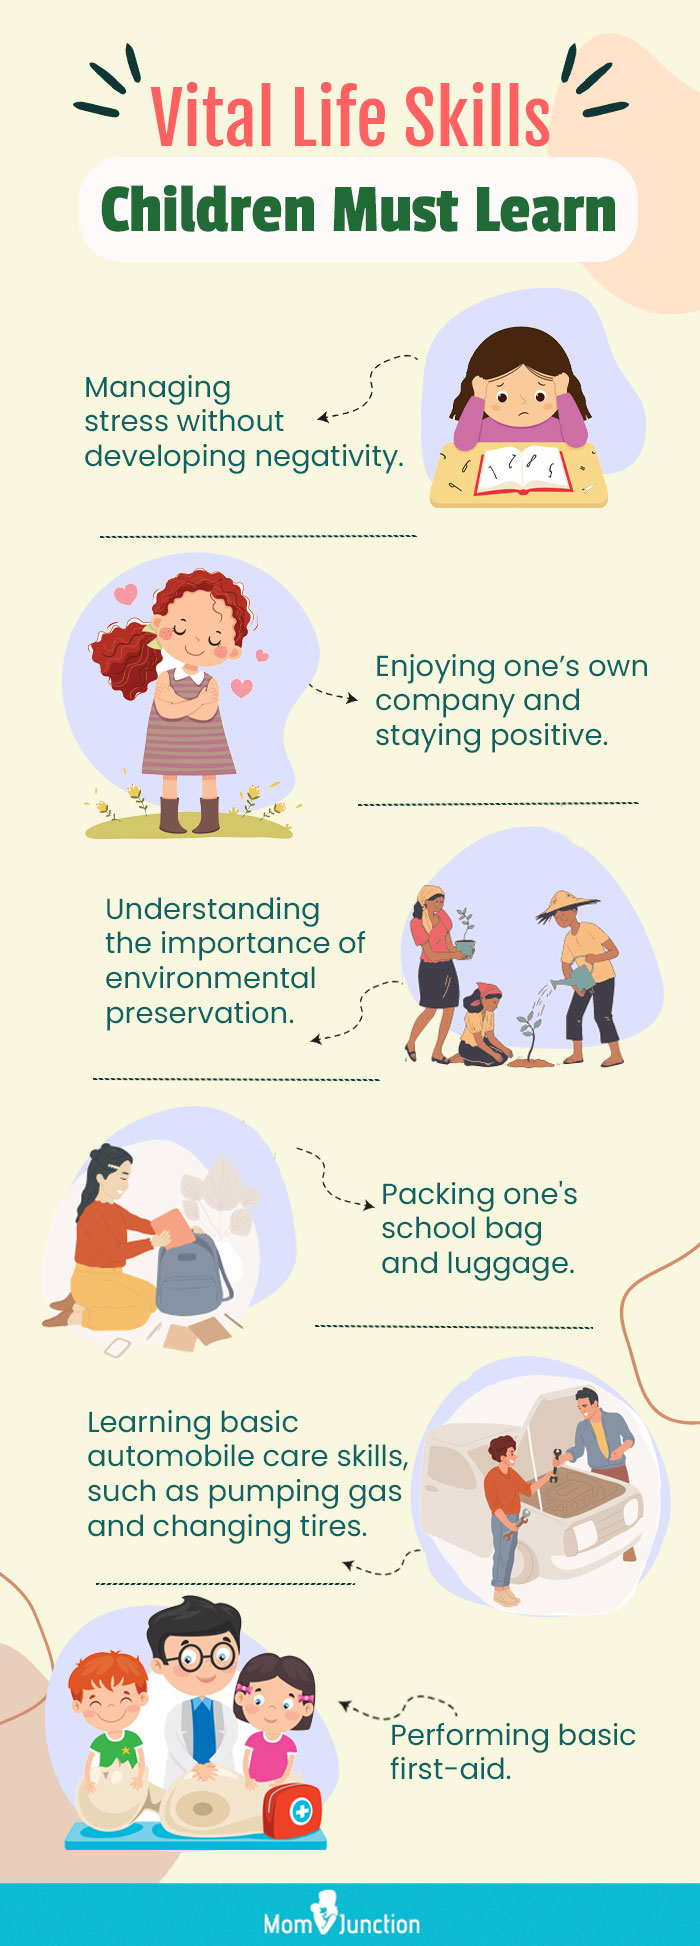 7 Important Life Lessons Kids Should Learn